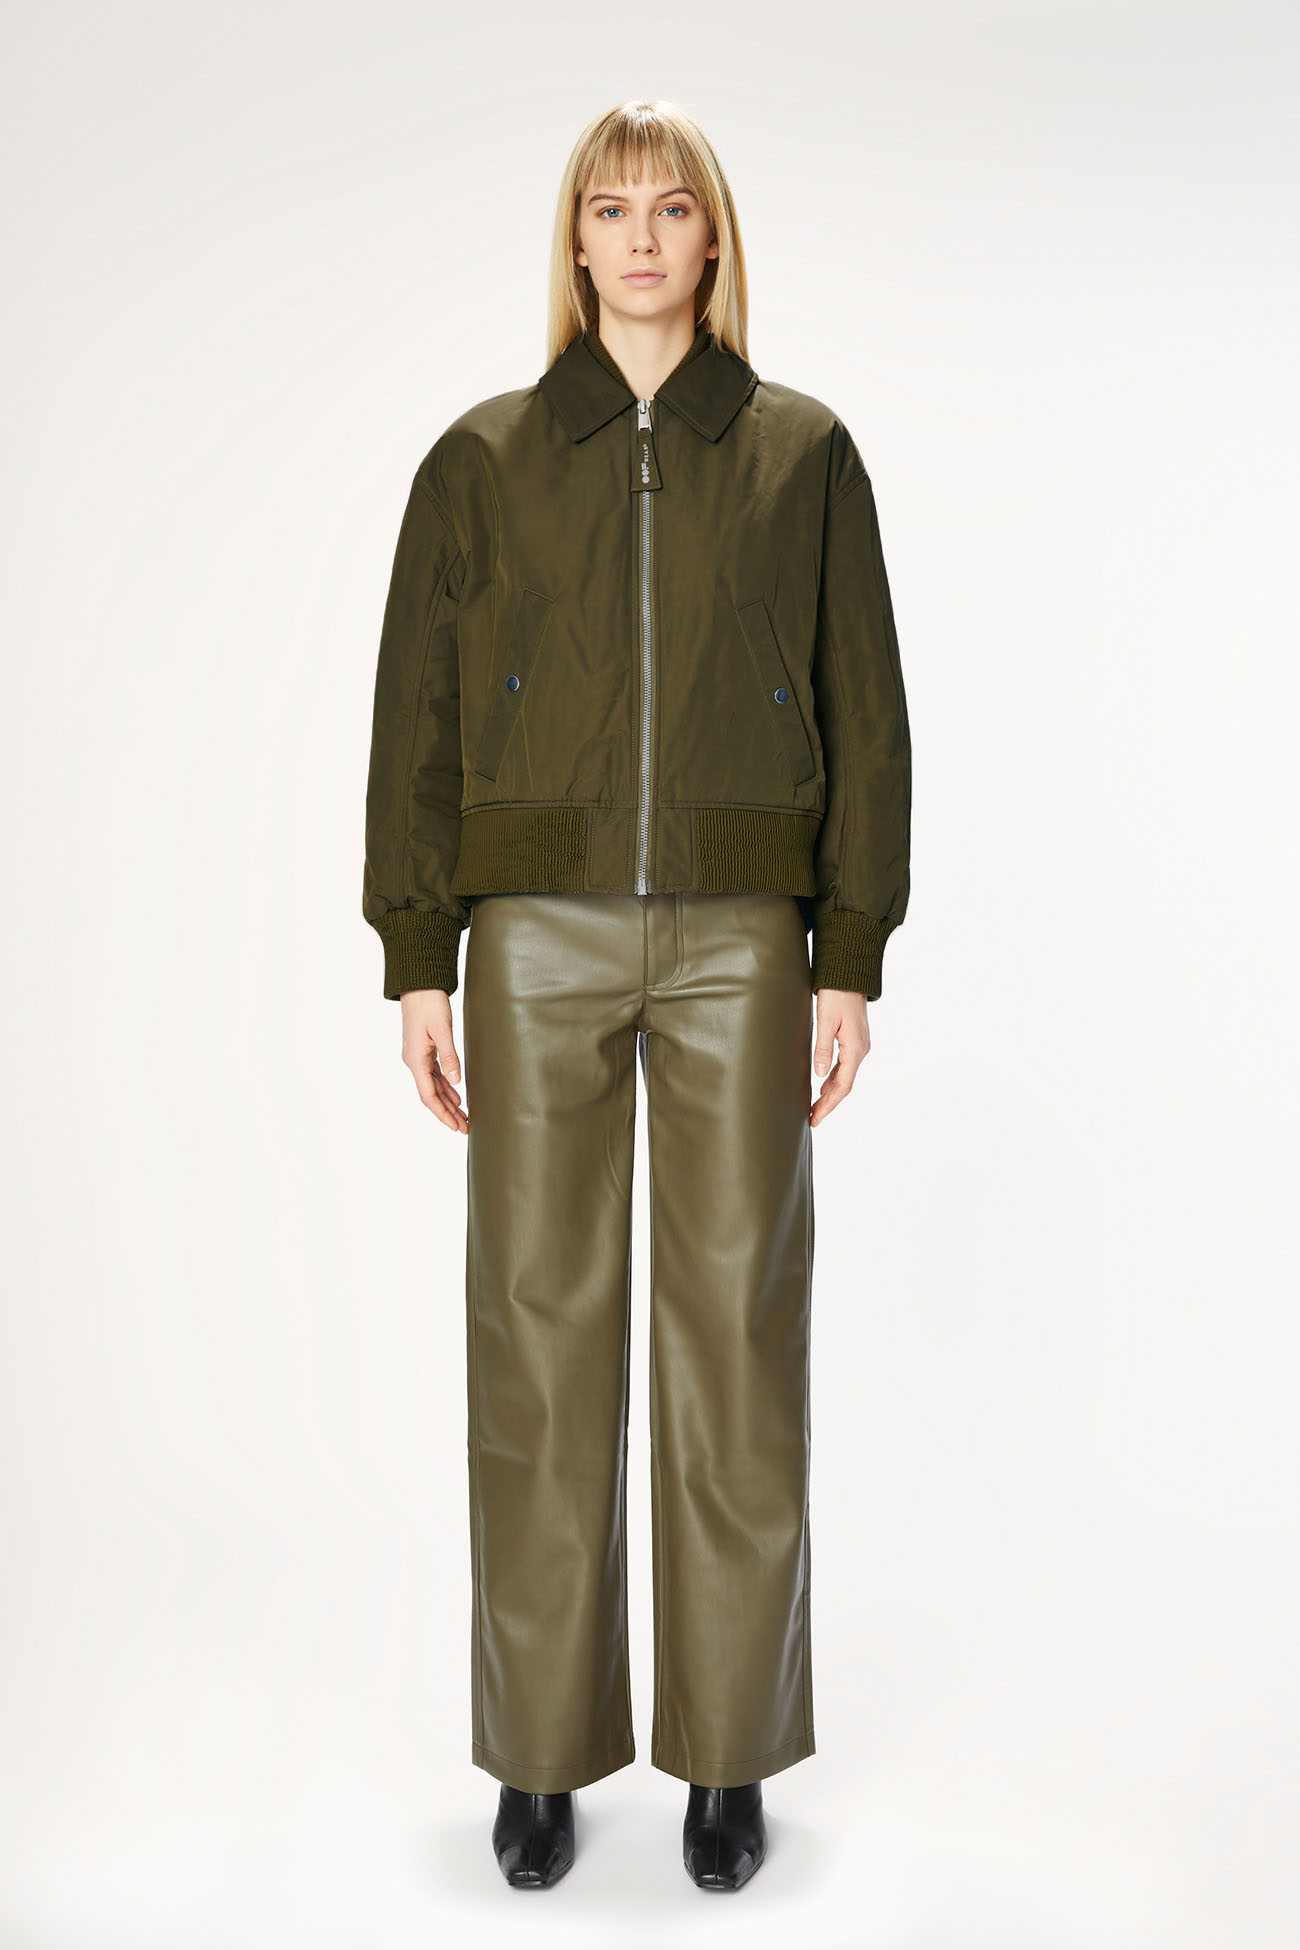 JACKET 9166 MADE IN NYLON MEMORY - ARMY GREEN - OOF WEAR